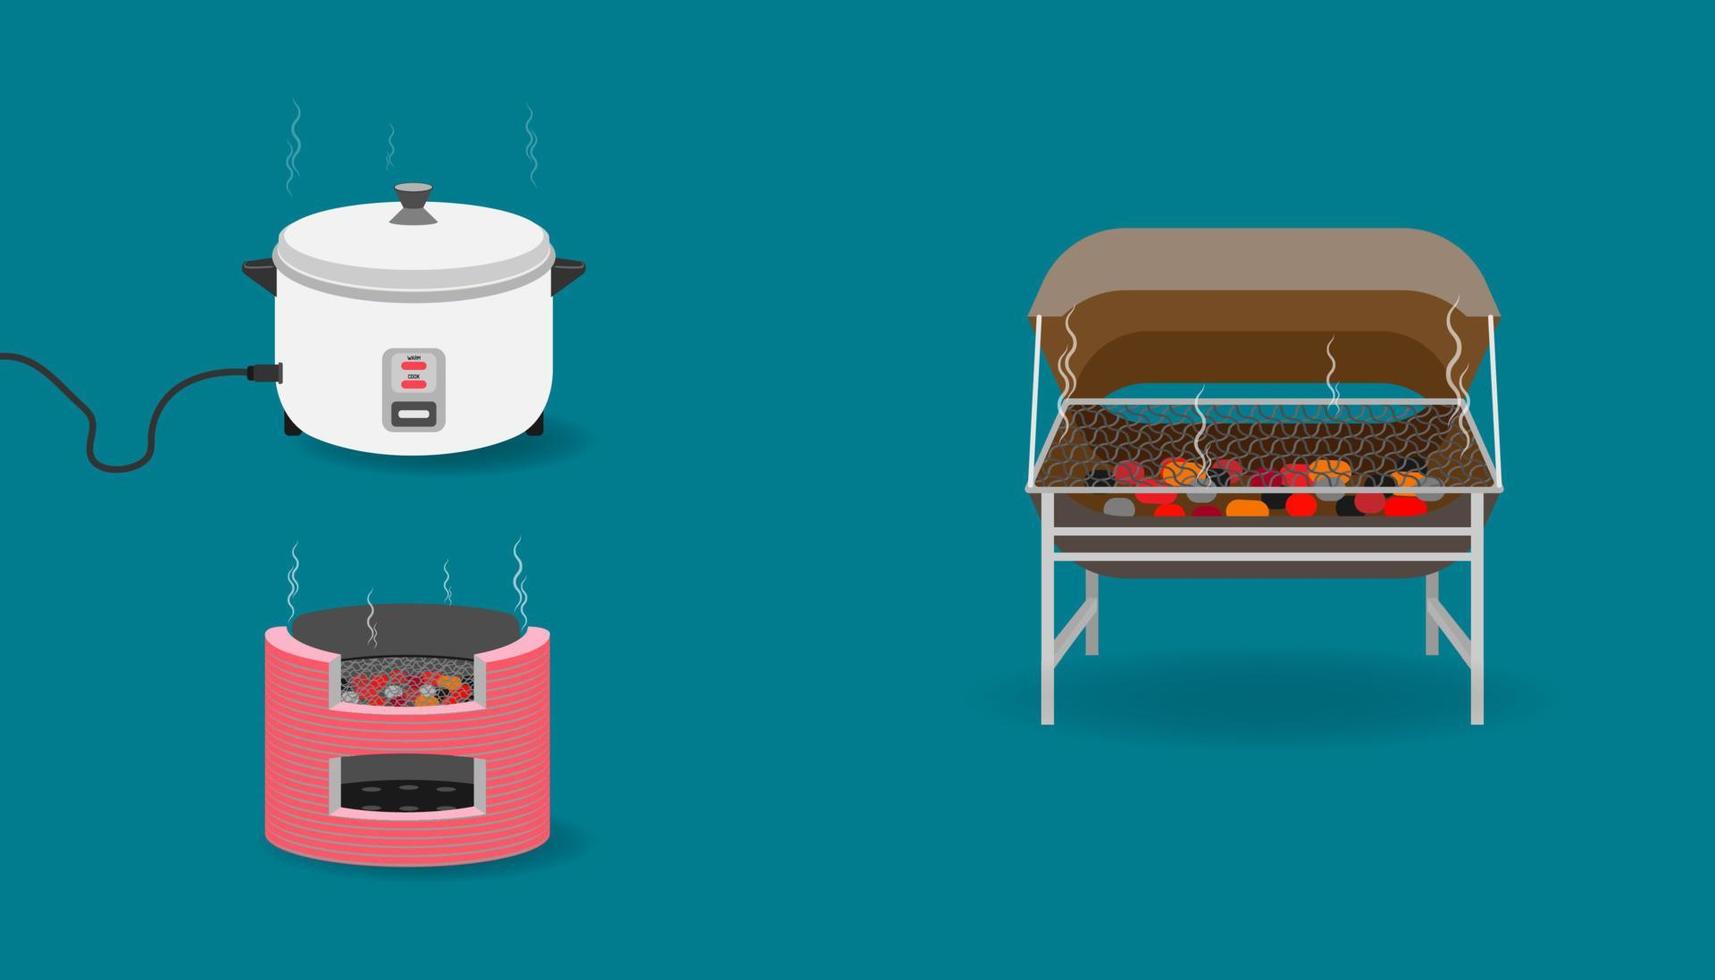 set of kitchen equipment with tank toaster charcoal rice cooker. vector illustration eps10